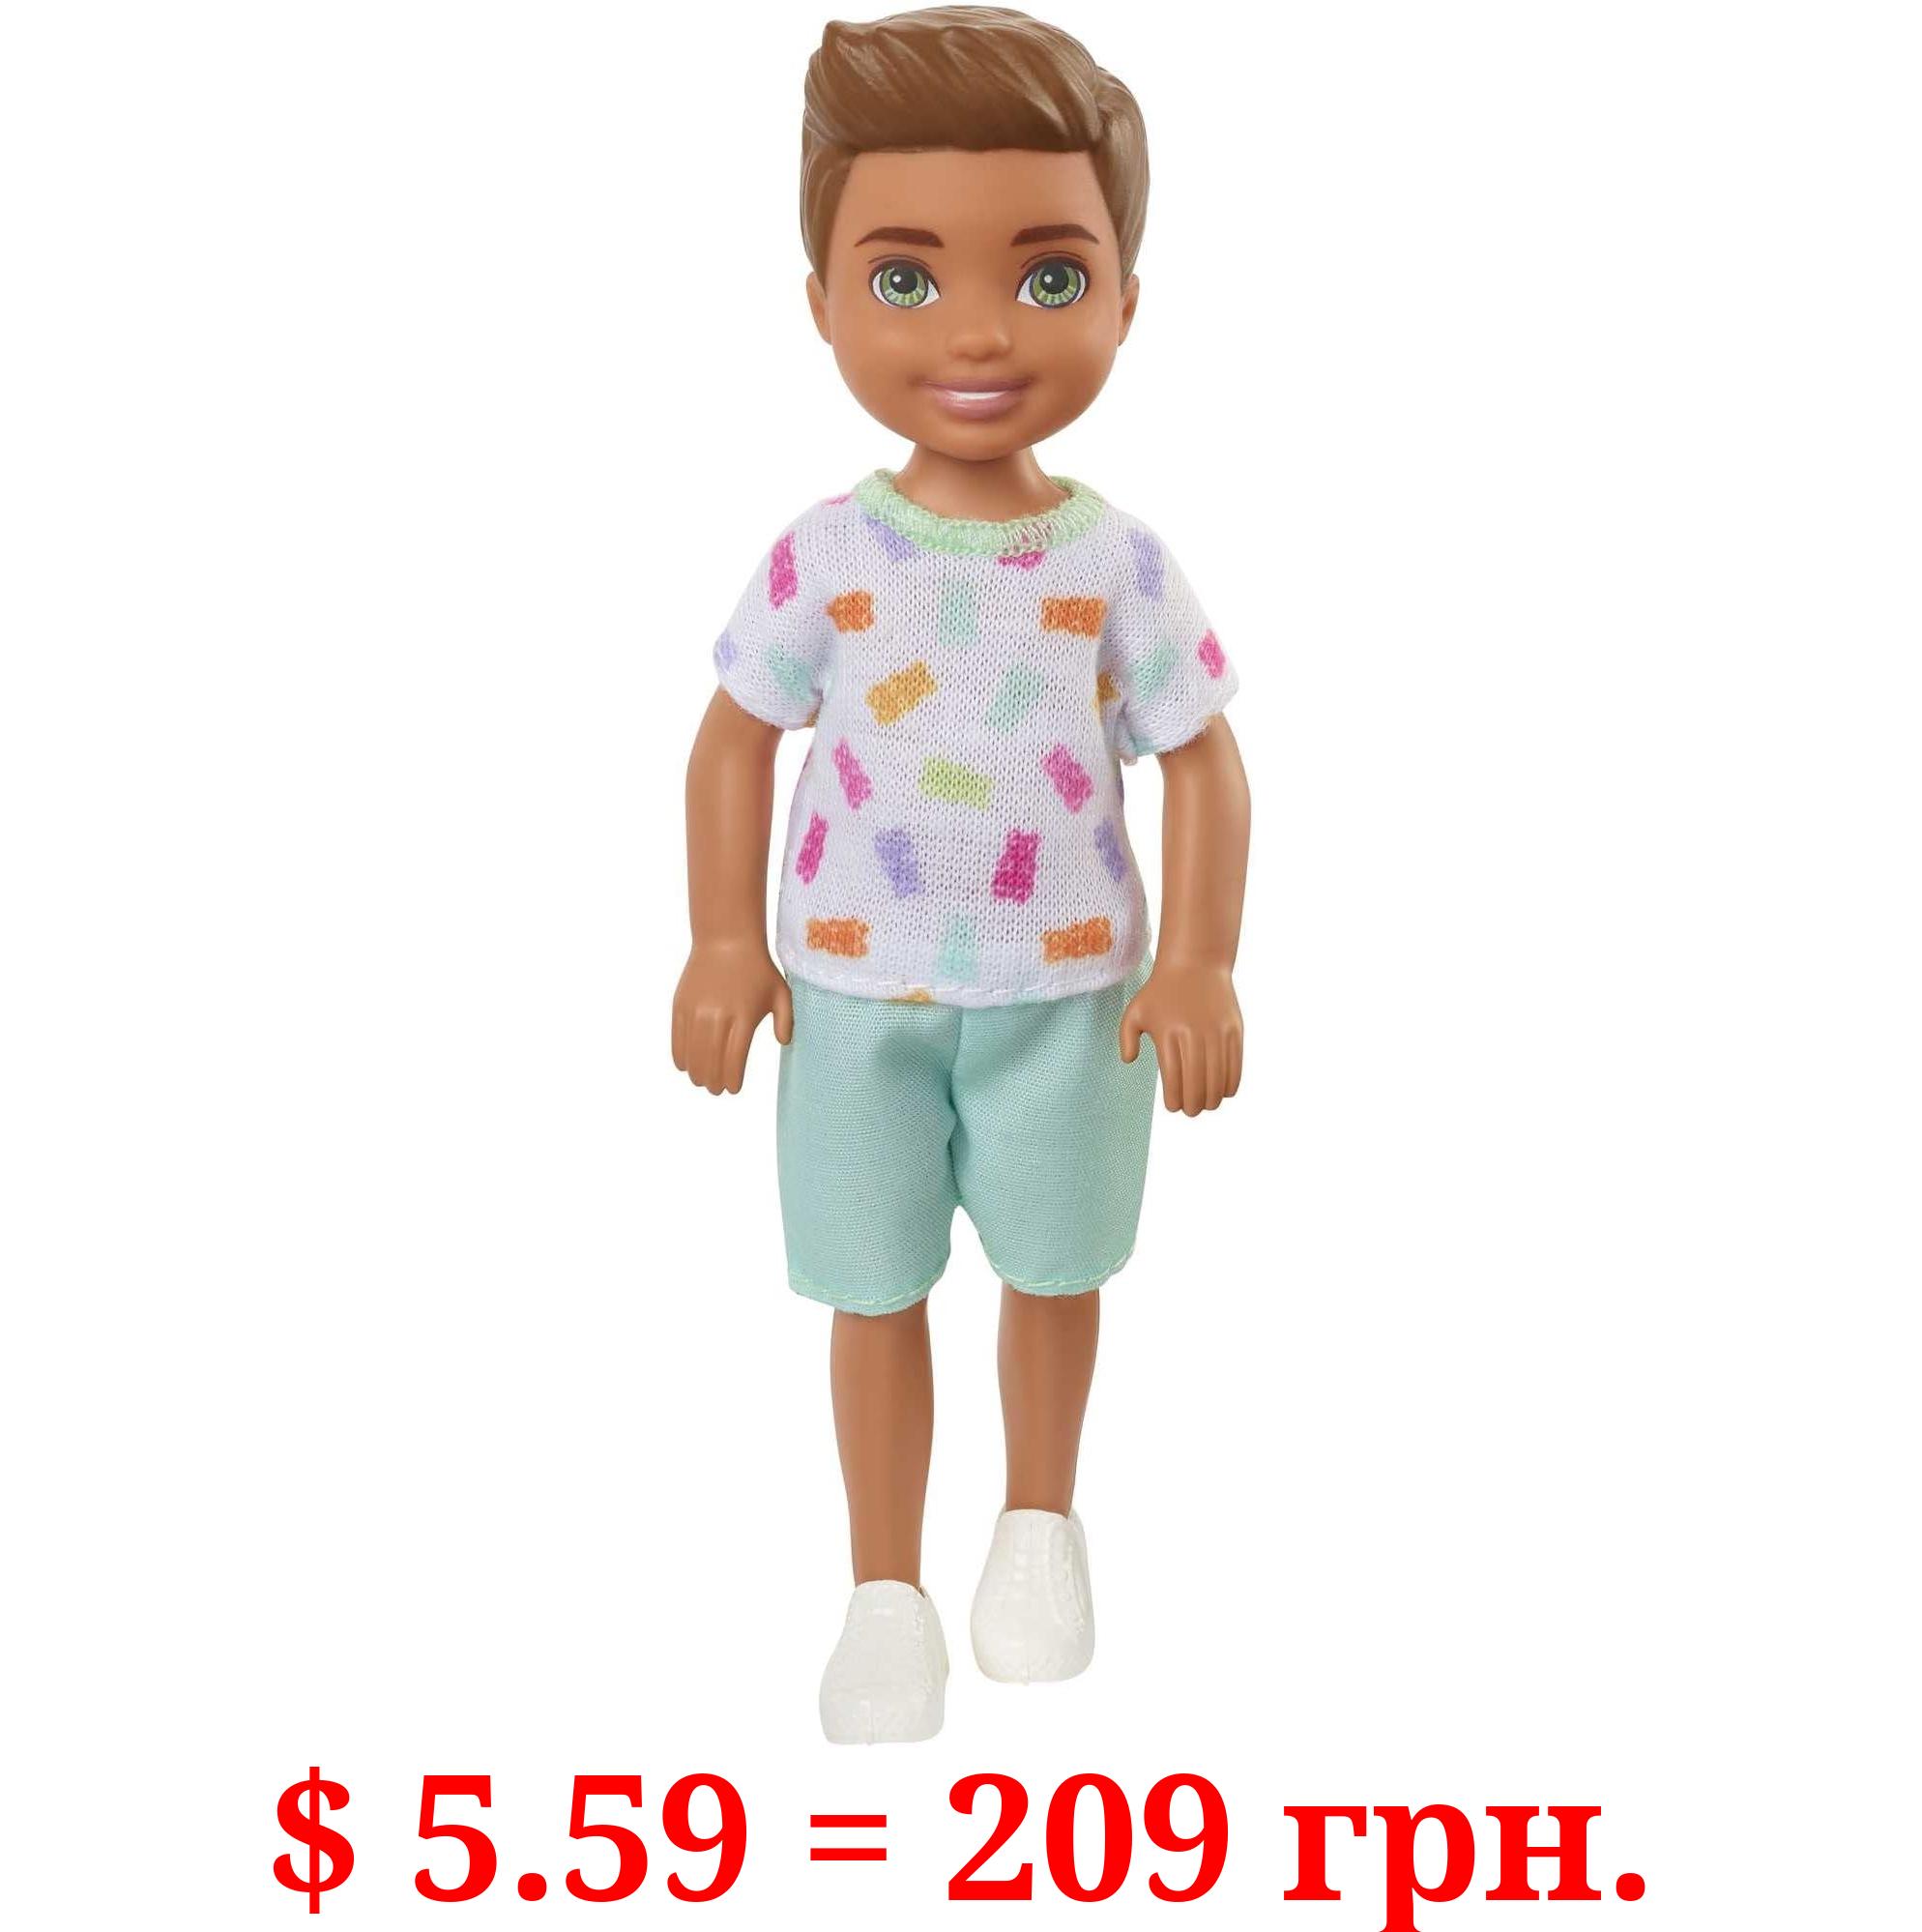 Barbie Chelsea Doll, Small Boy Doll with Brown Hair & Blue Eyes Wearing Gummy Bear T-Shirt, Shorts & Shoes